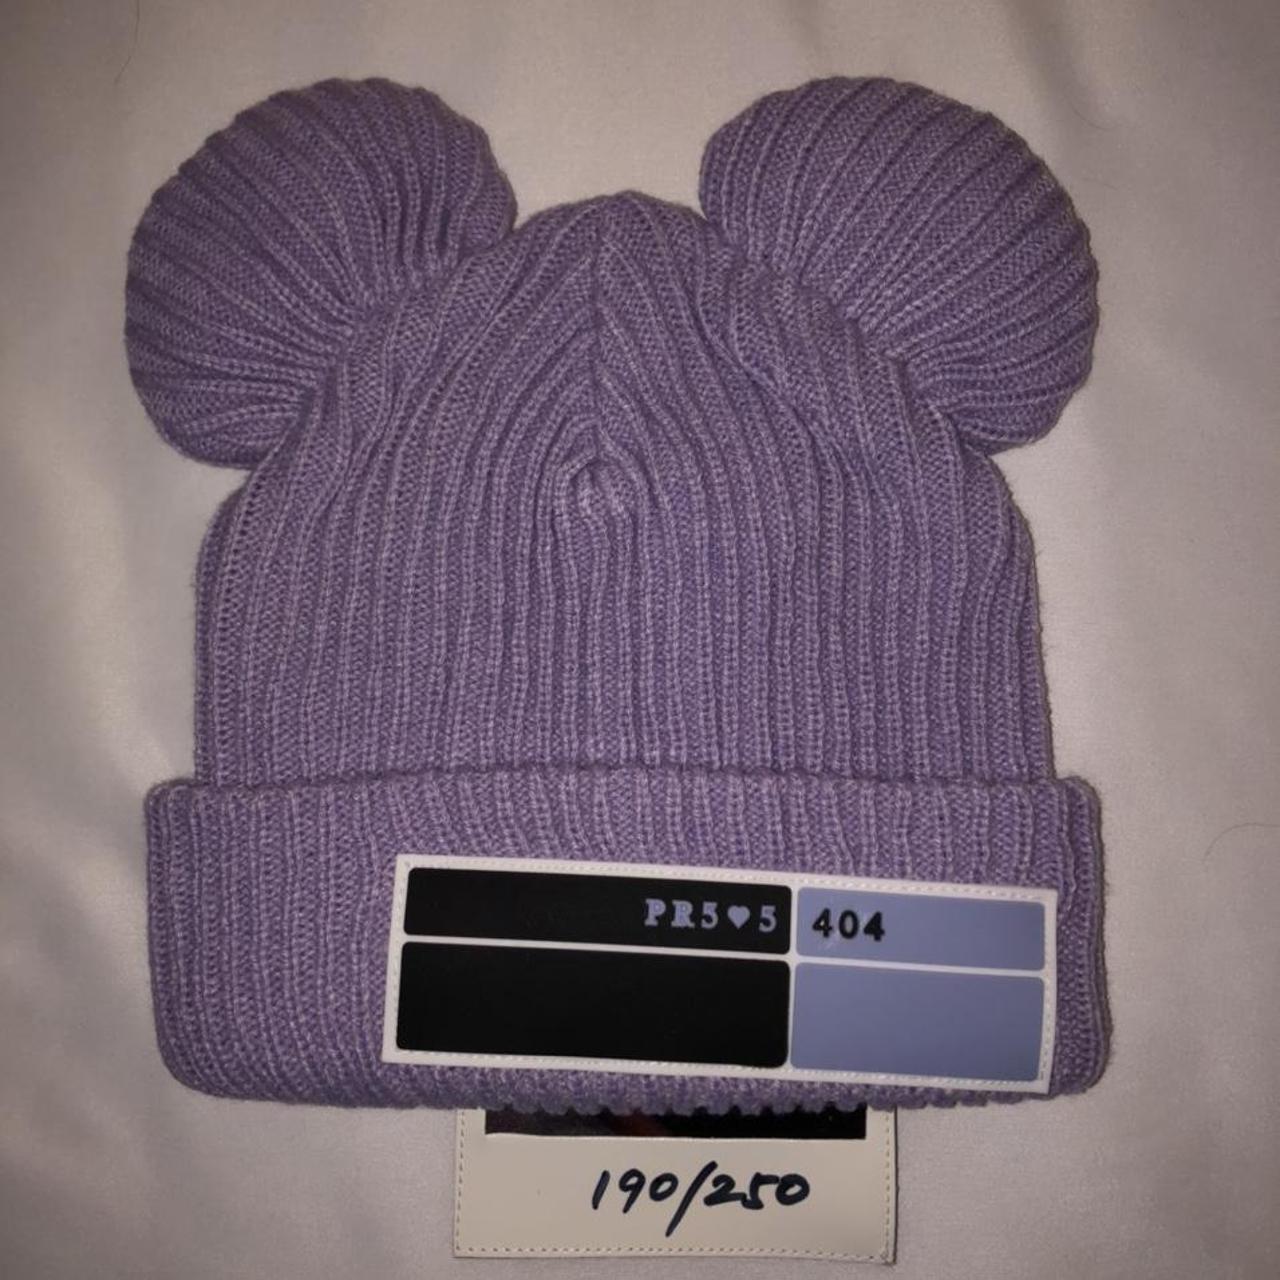 Jose Wong Mouse Picky Ear Beanie in the lavender - Depop